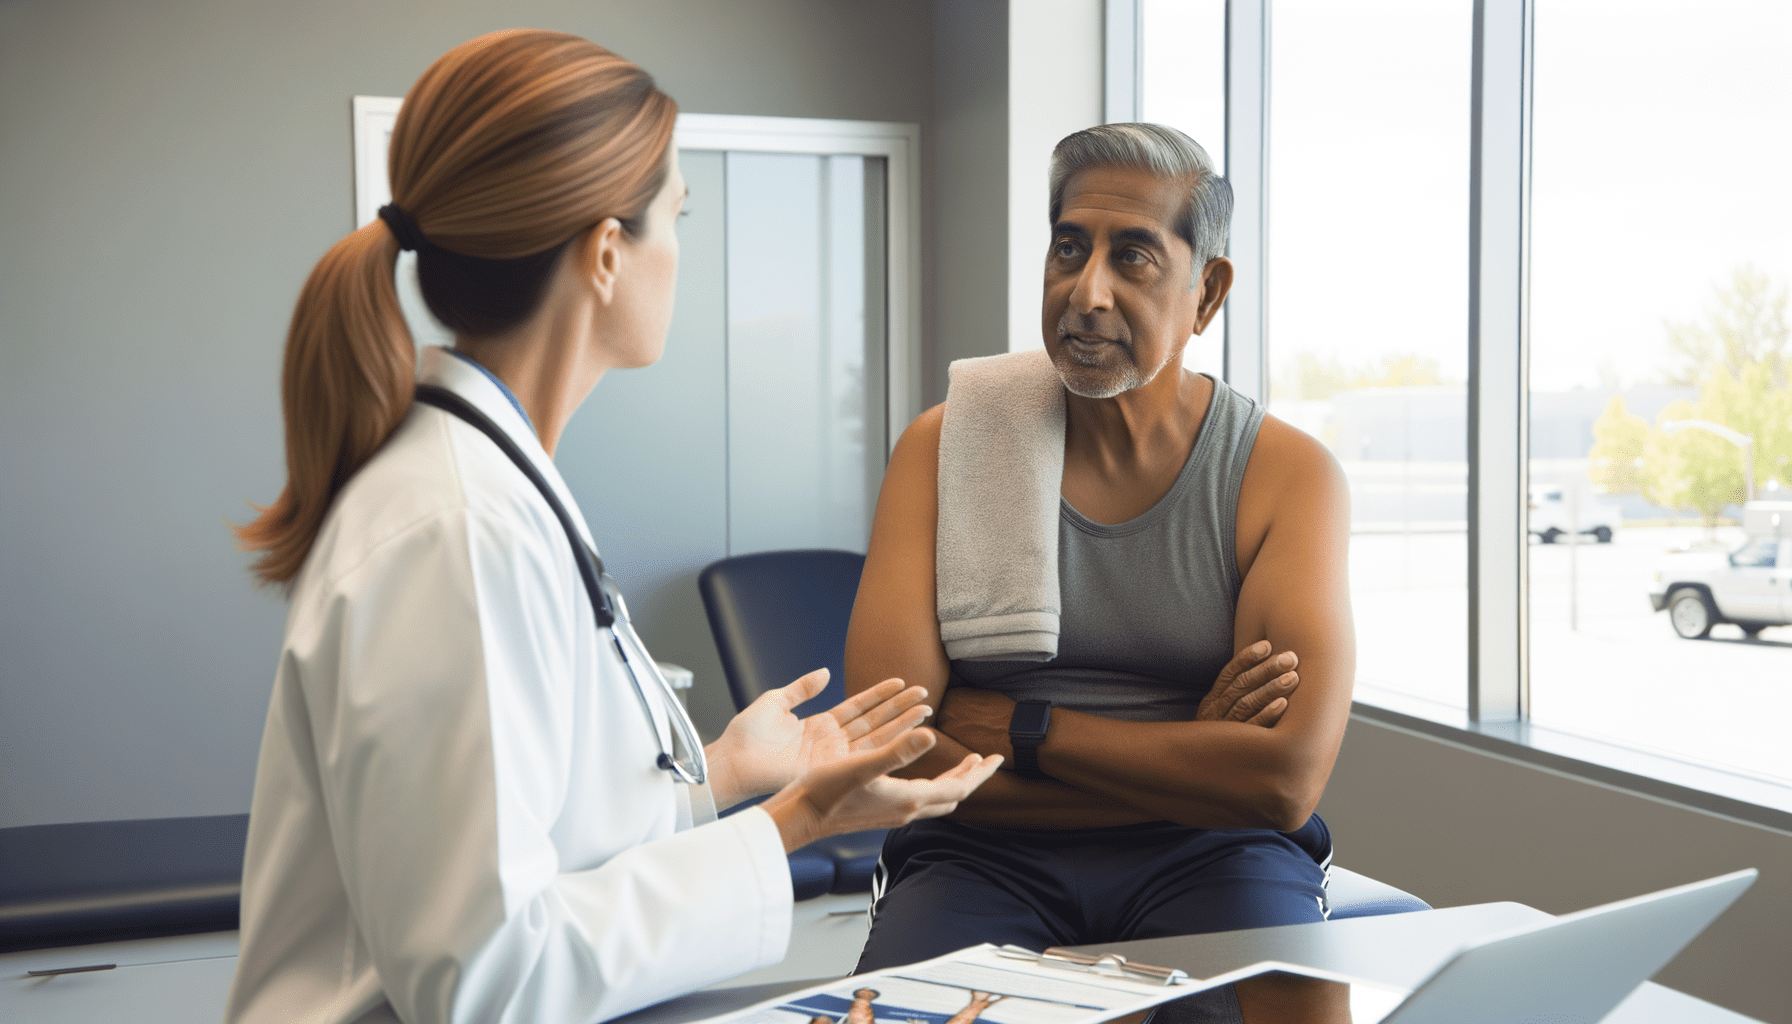 Erectile Dysfunction: Treatment Options for the Aging Male